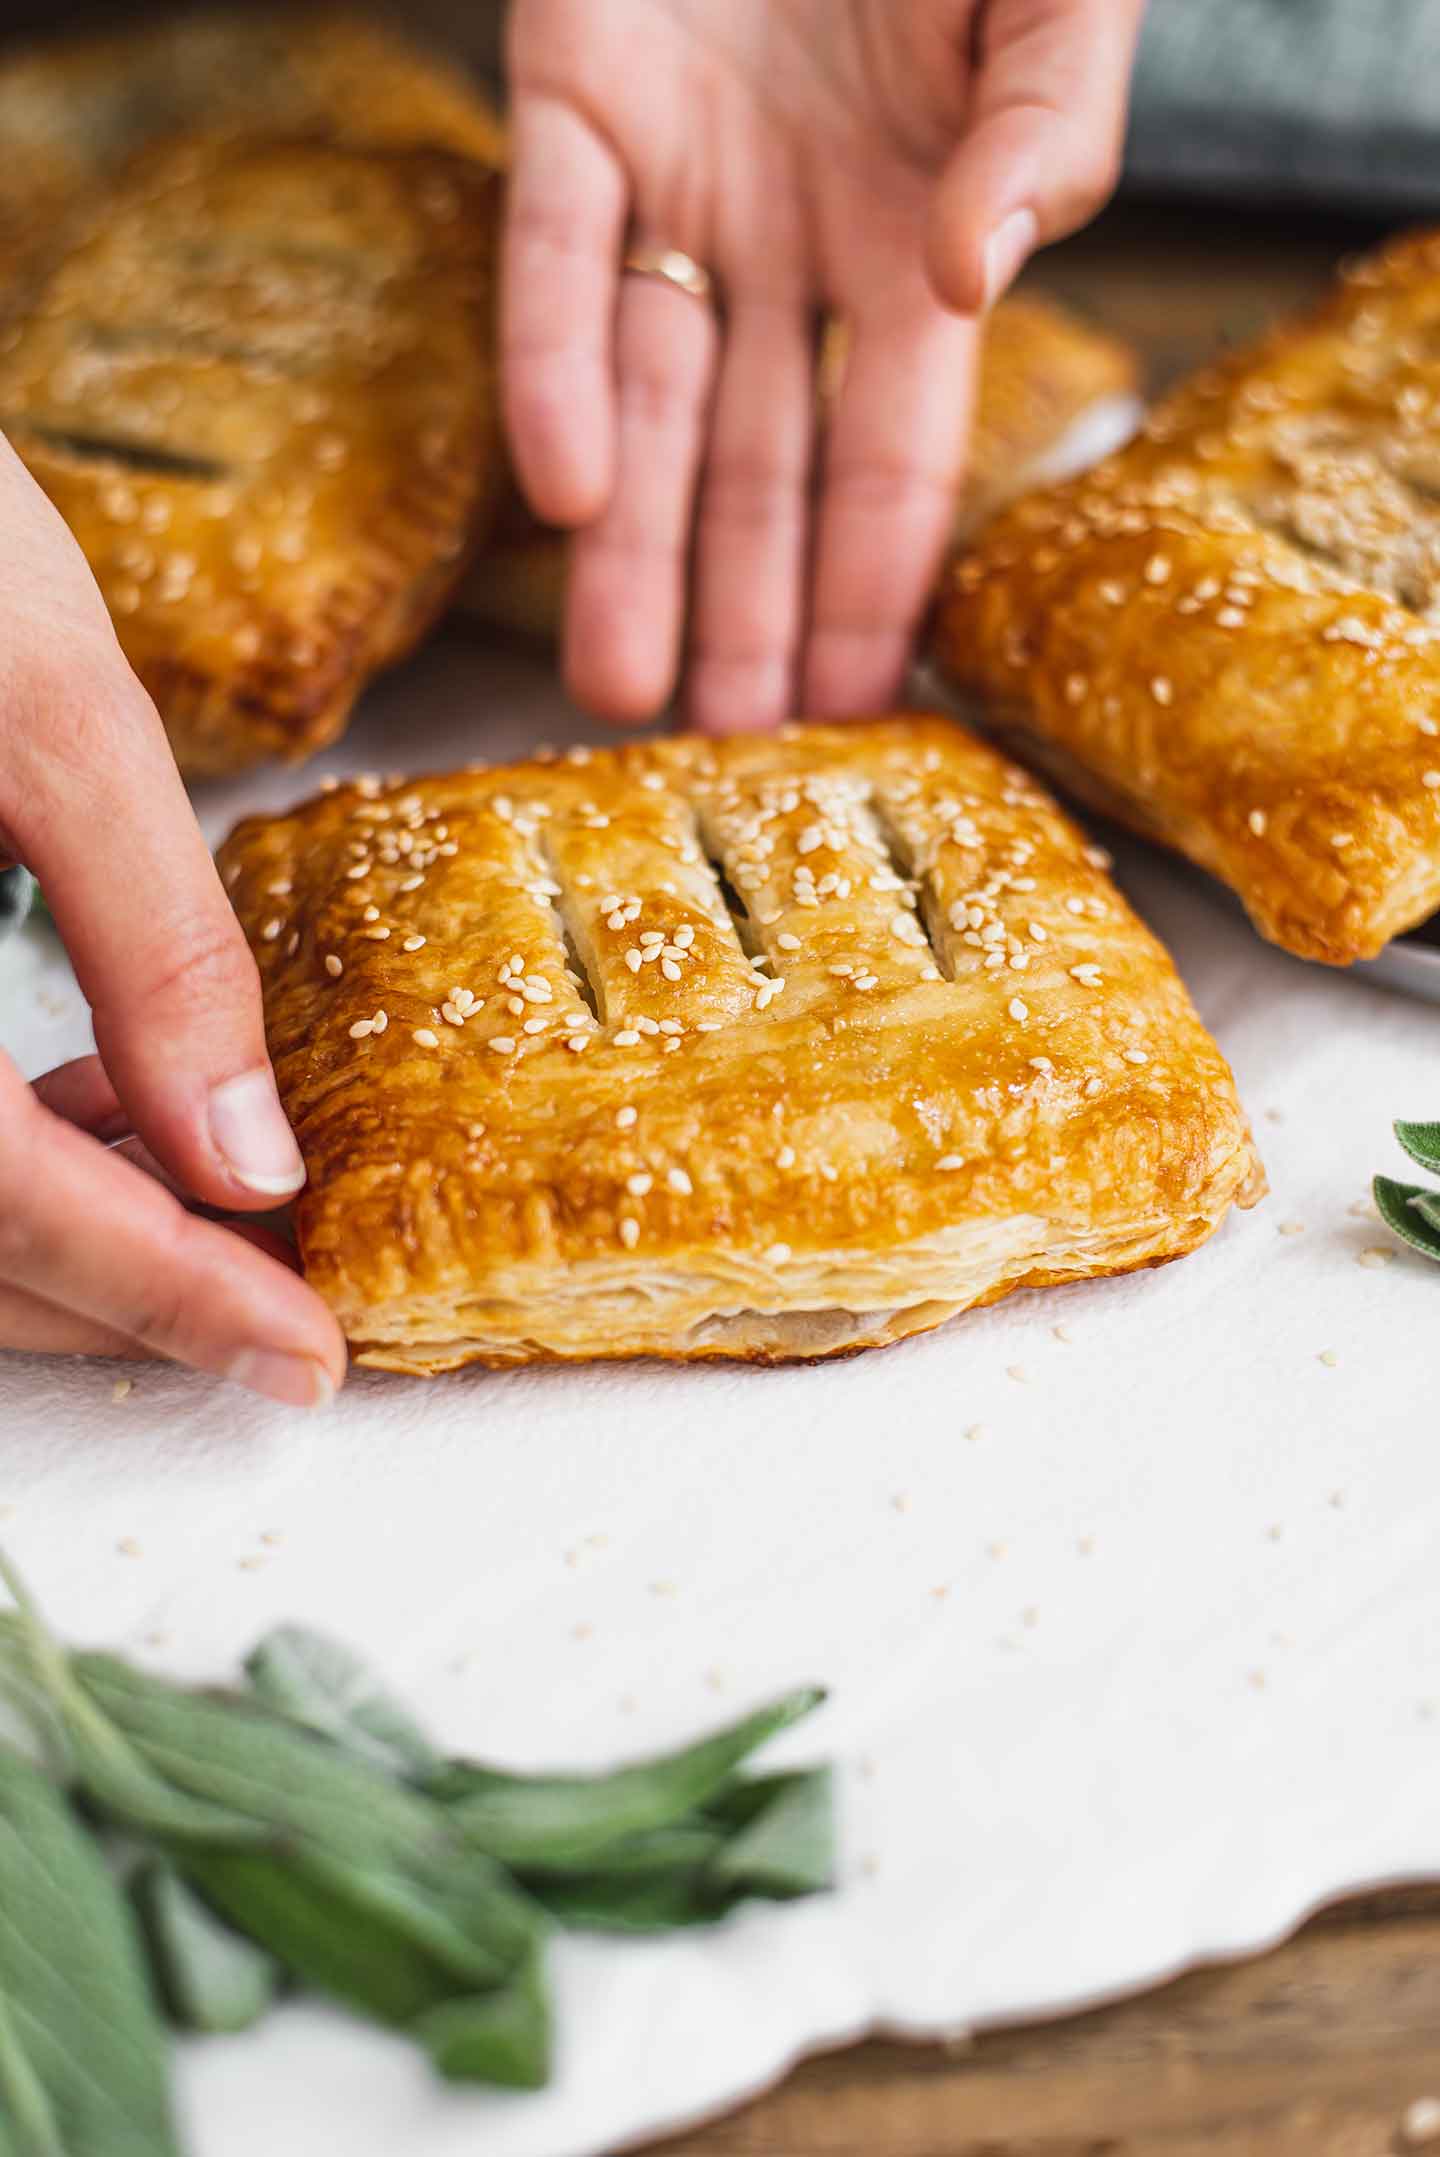 Side view of two hands laying a vegan puff pastry pocket on a white tray. The side of the pastry is visible and is nicely laminated, browned, and flaky.